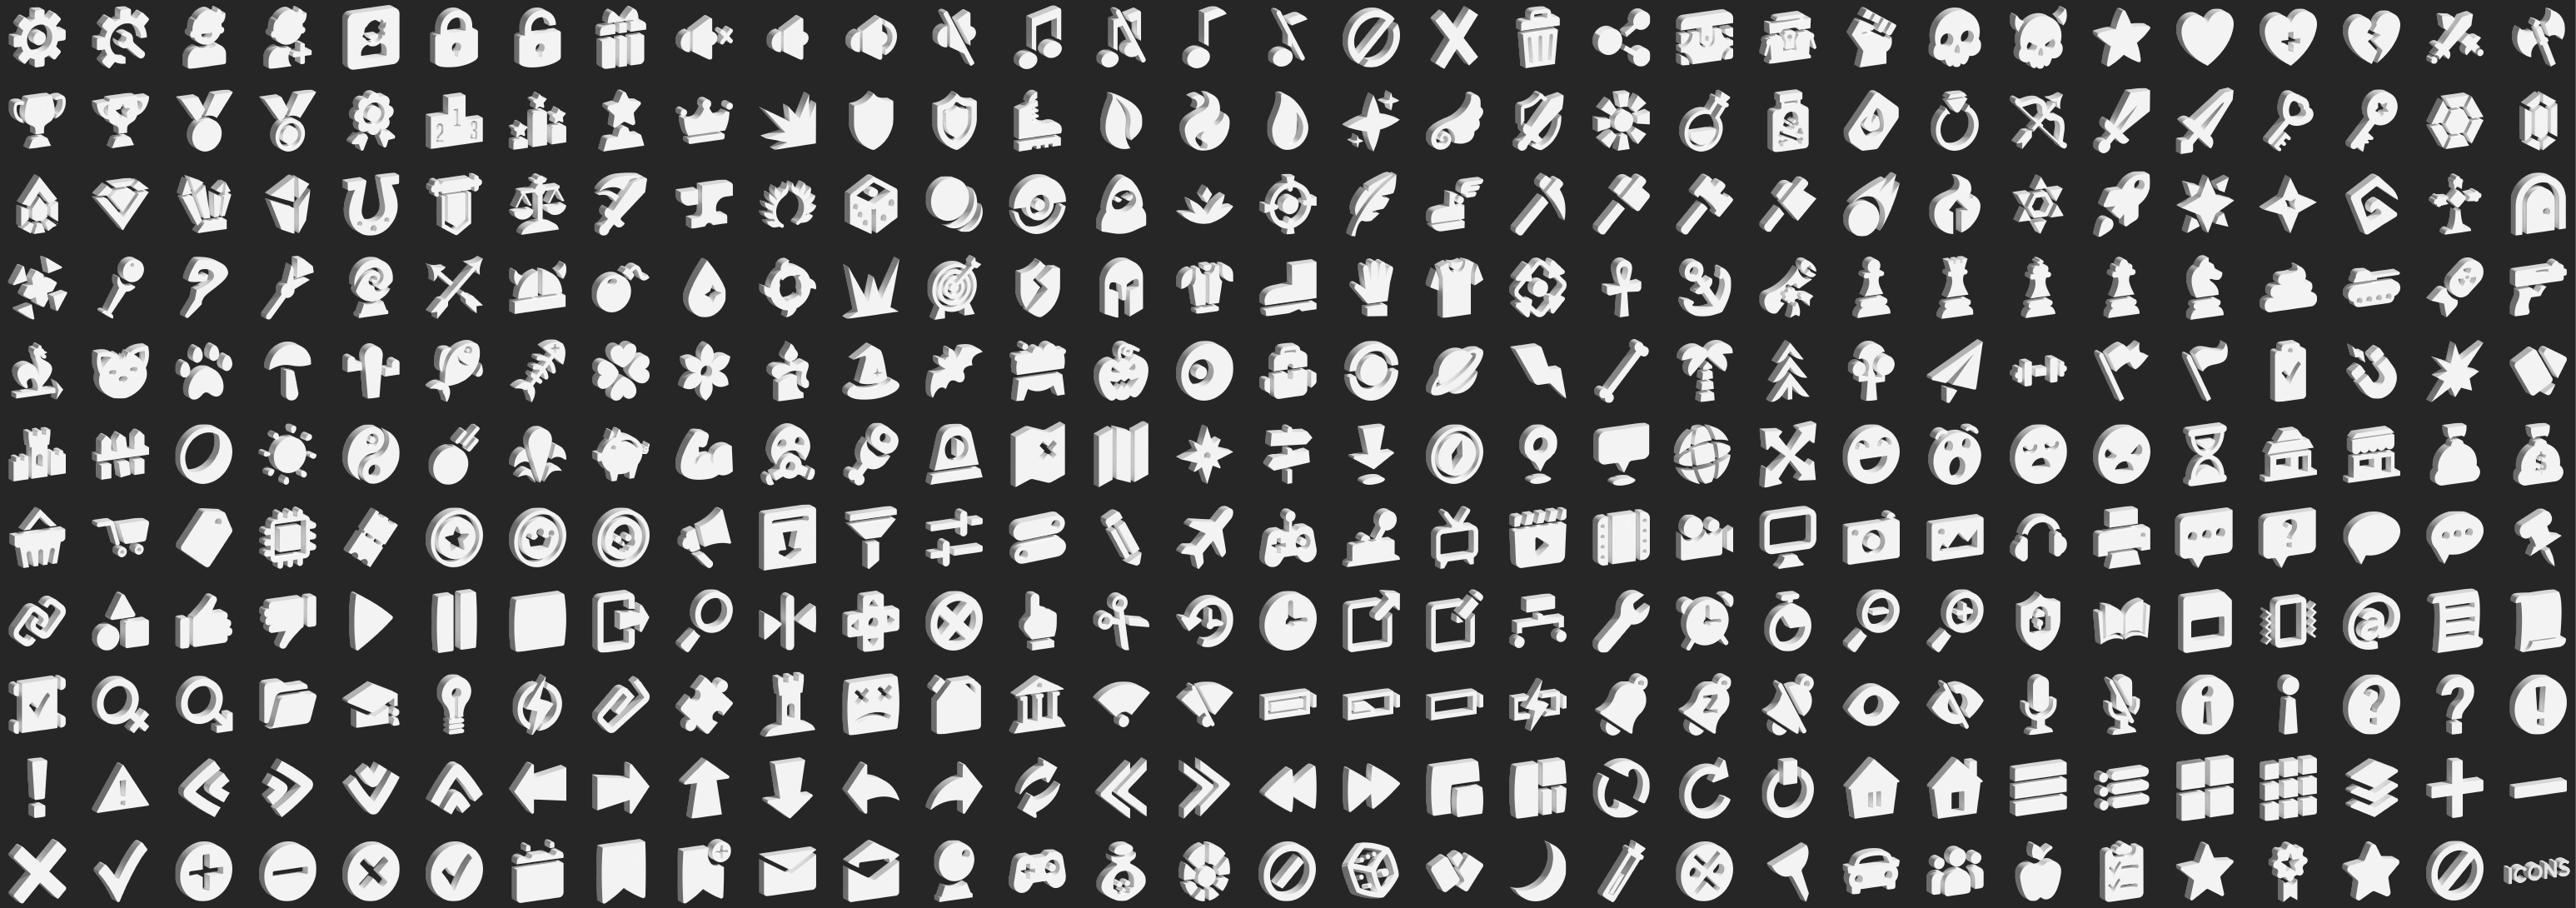 3D Icons Pack for Games